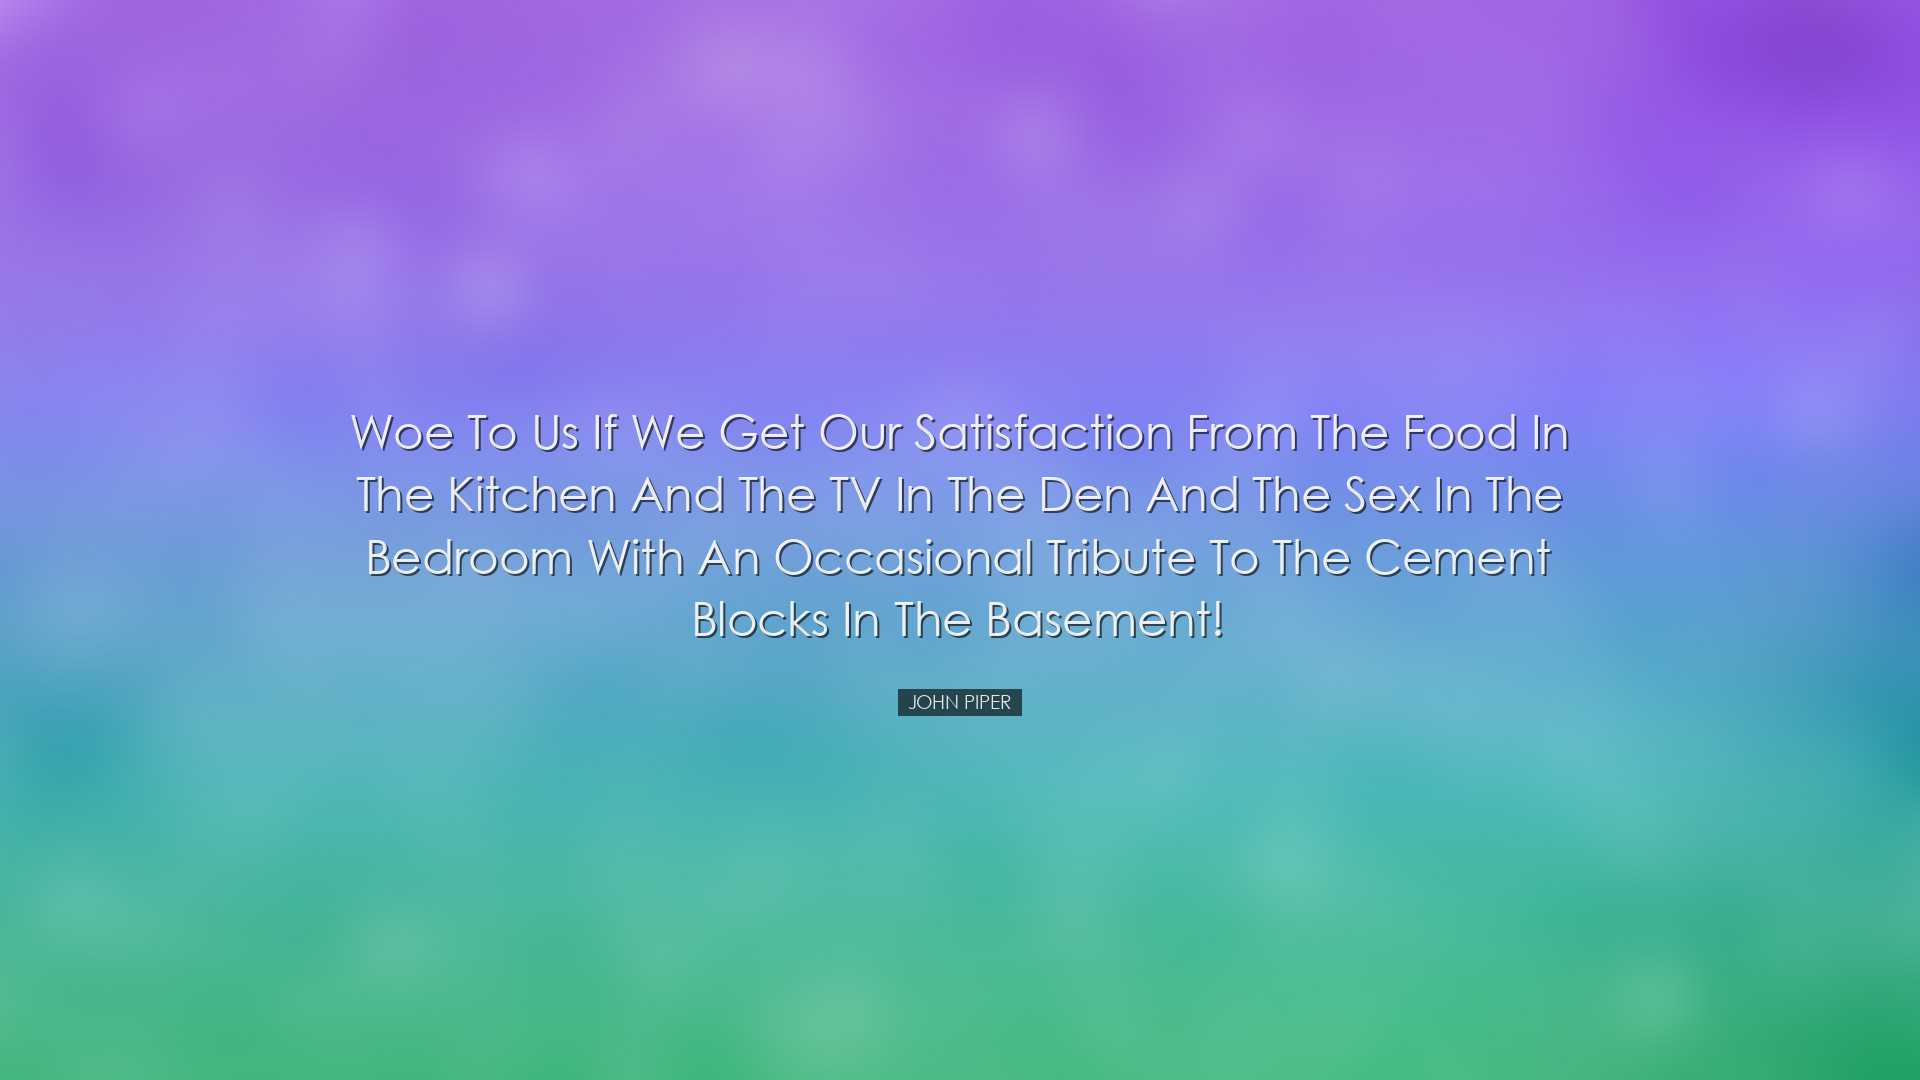 Woe to us if we get our satisfaction from the food in the kitchen